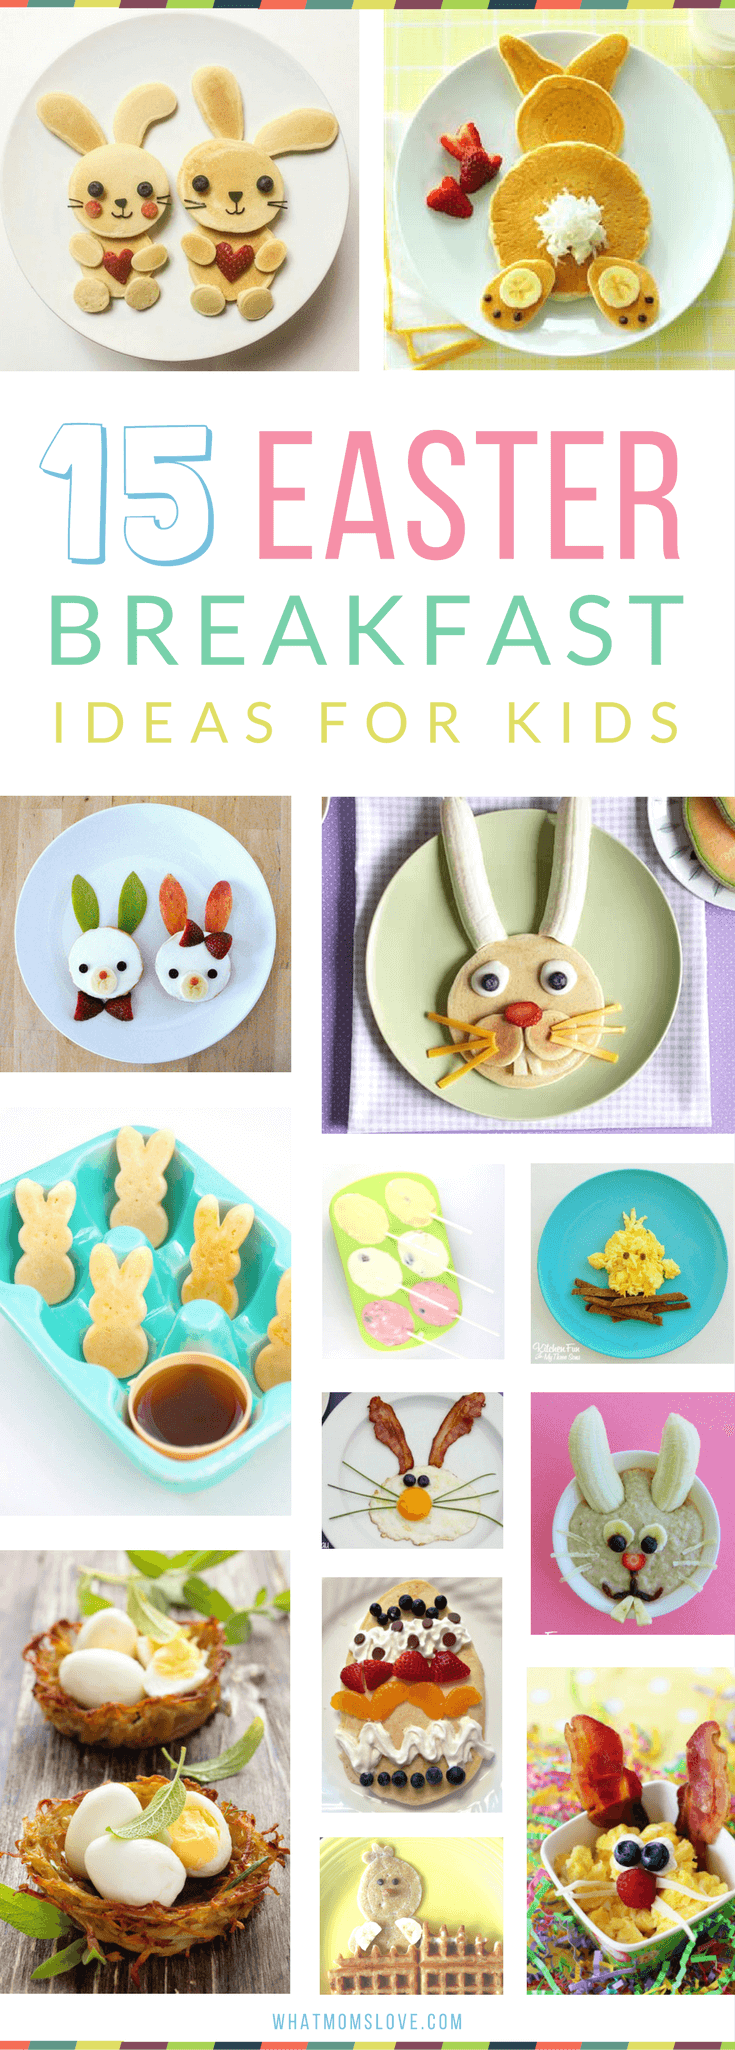 Easter Breakfast Ideas for Kids | Healthy, easy and fun recipes for you to make - also great for brunch!